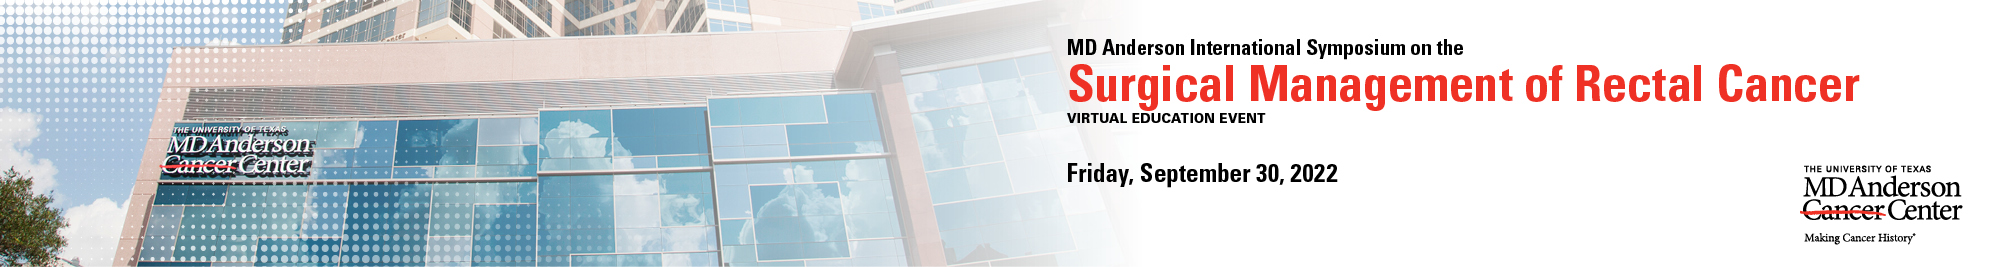 MD Anderson International Symposium on the Surgical Management of Rectal Cancer Banner